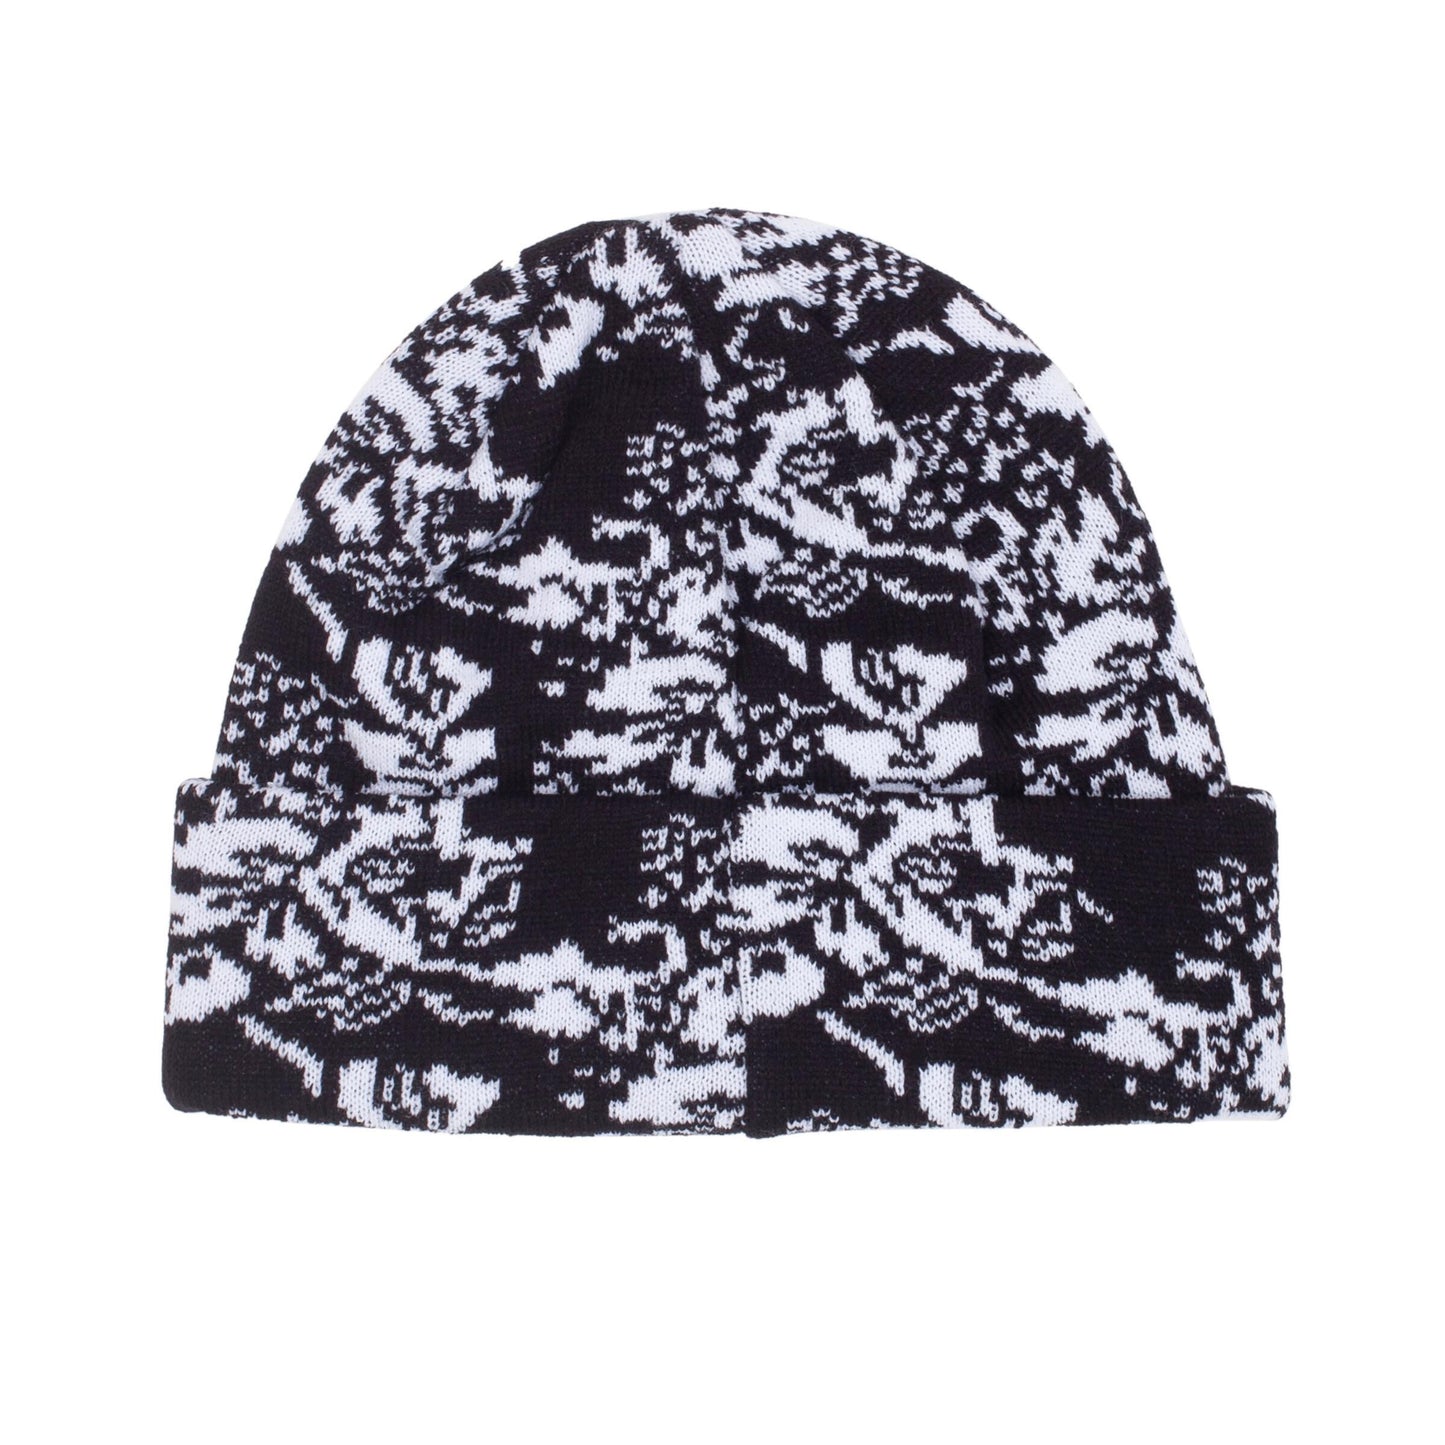 GX1000 Floral Beanie: Assorted Colors